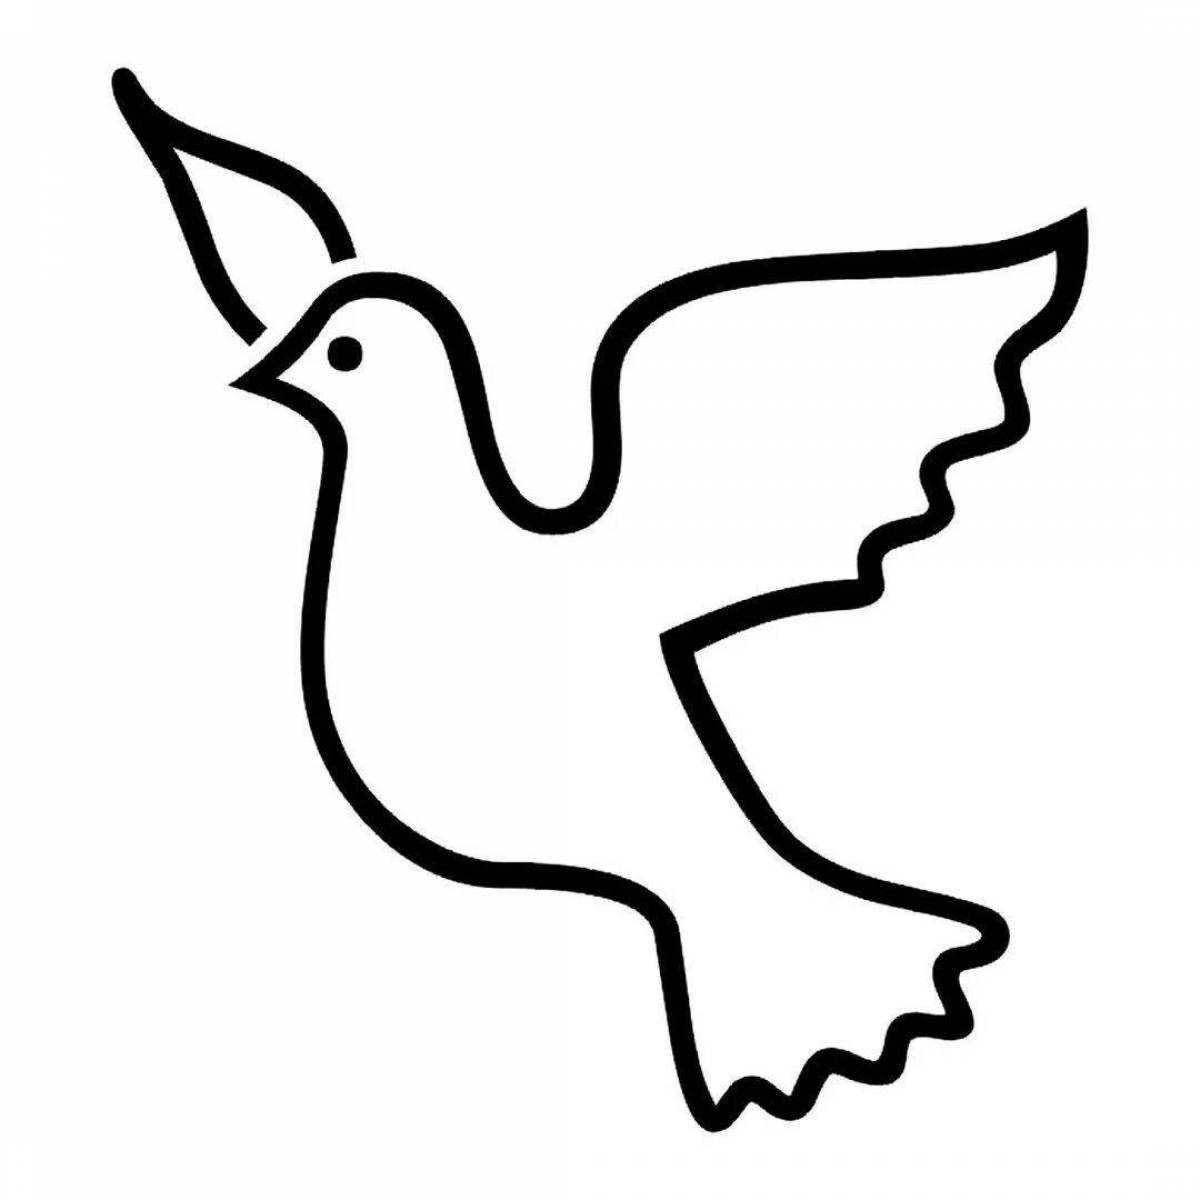 Coloring book beckoning peace dove for kids